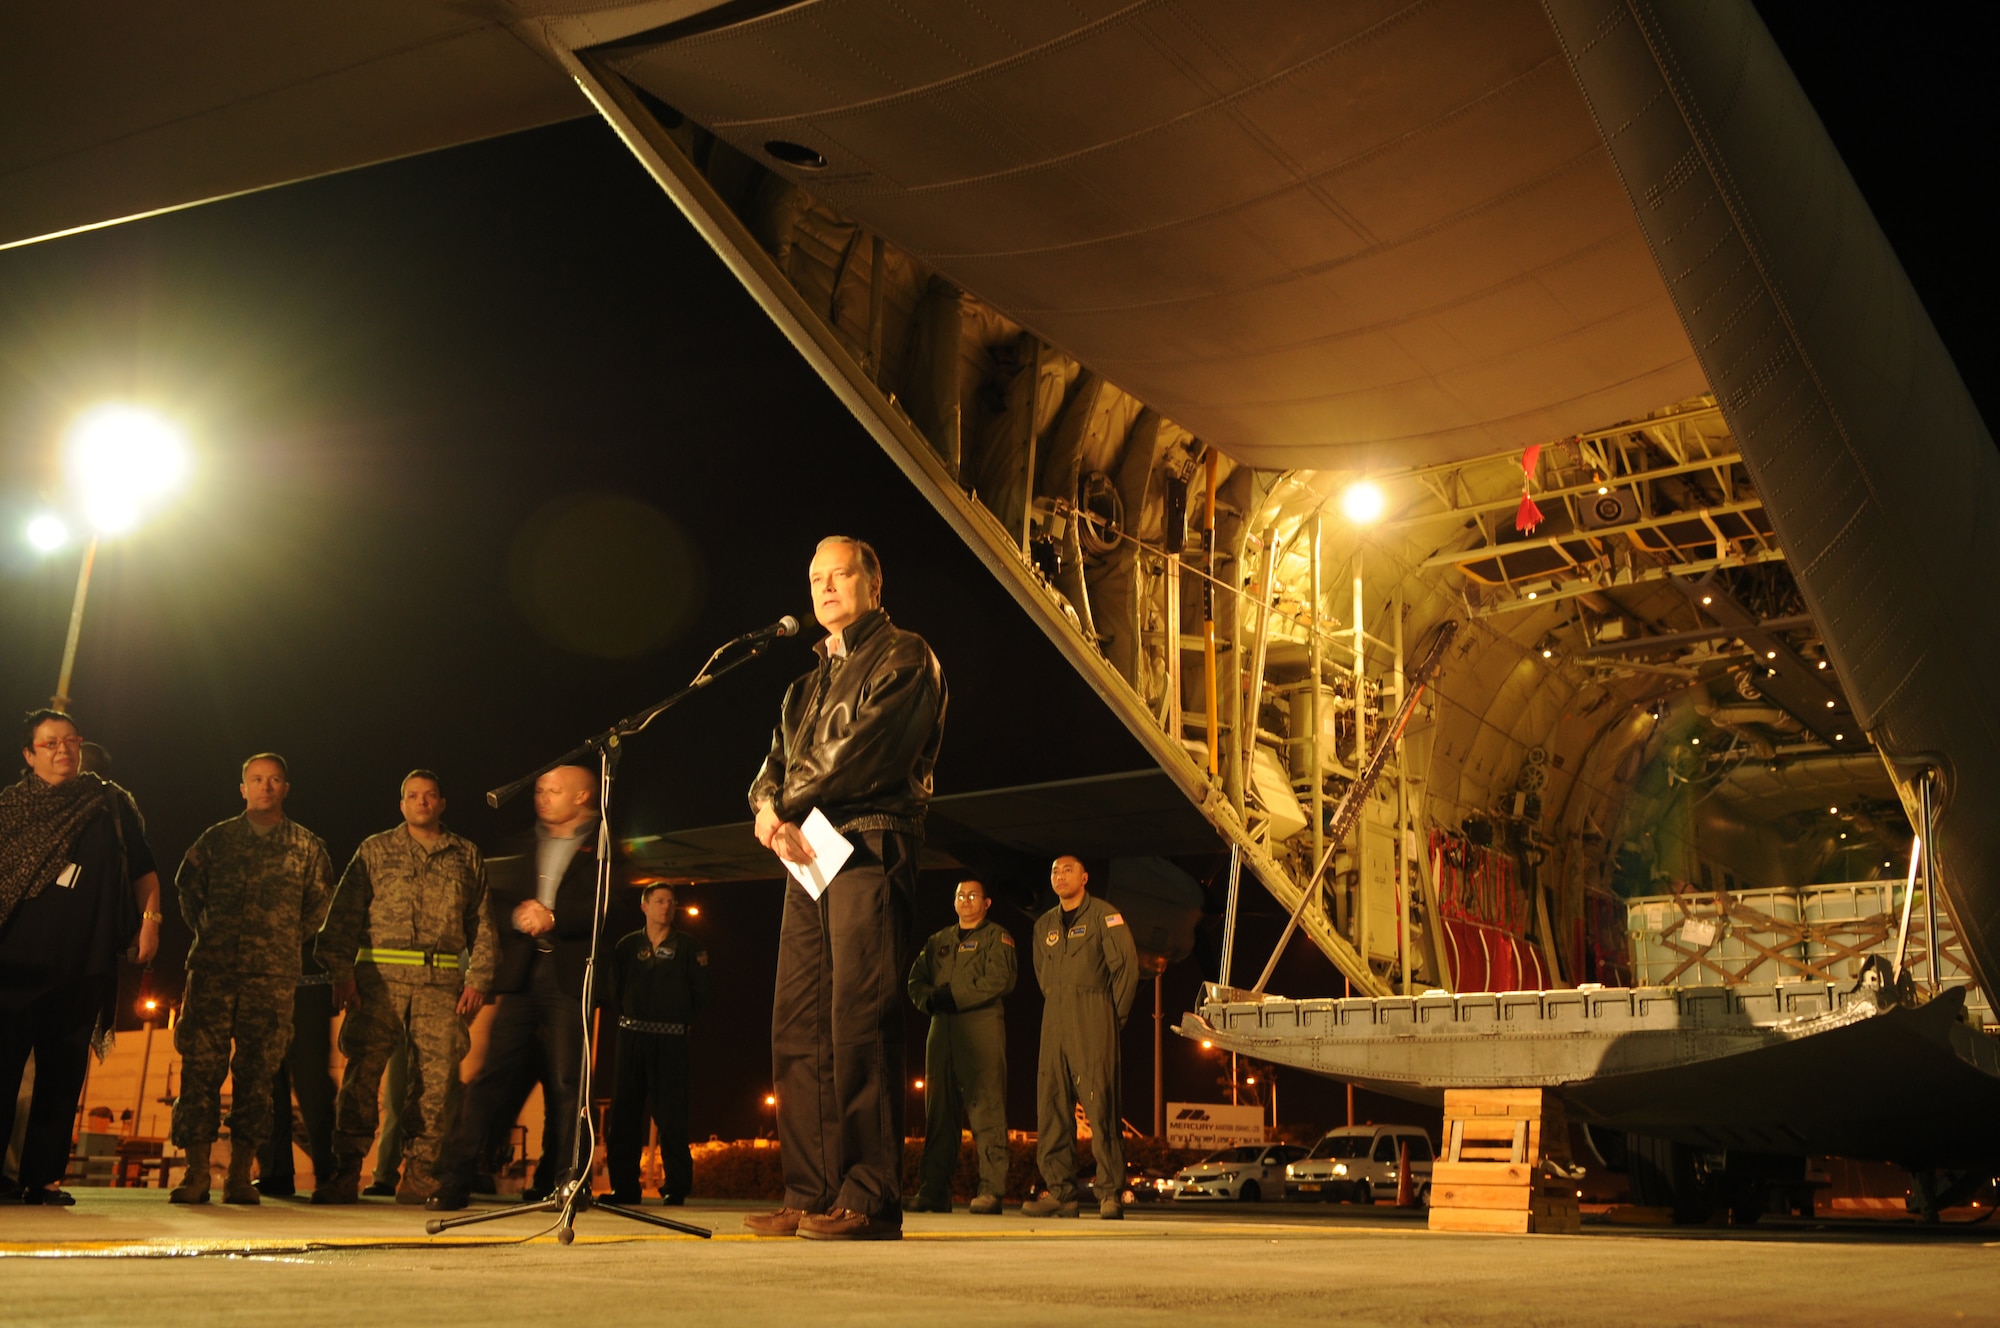 TEL AVIV, Israel -- Ambassador James B. Cunningham, U.S. Ambassador to Israel,  speaks to media in front of a C-130J Super Hercules that transported fire retardant to support the response to wildfires near Haifa, Israel, Dec. 4. U.S. Air Forces in Europe airlifted 20 tons of fire retardant to Israel in a joint effort to provide humanitarian assistance combating the worst wildfires in the nation's history. U.S. European Command purchased the fire retardant and began a mission following an official request from the Israeli government for support. (U.S. Air Force photo/Staff Sgt. Benjamin Wilson)